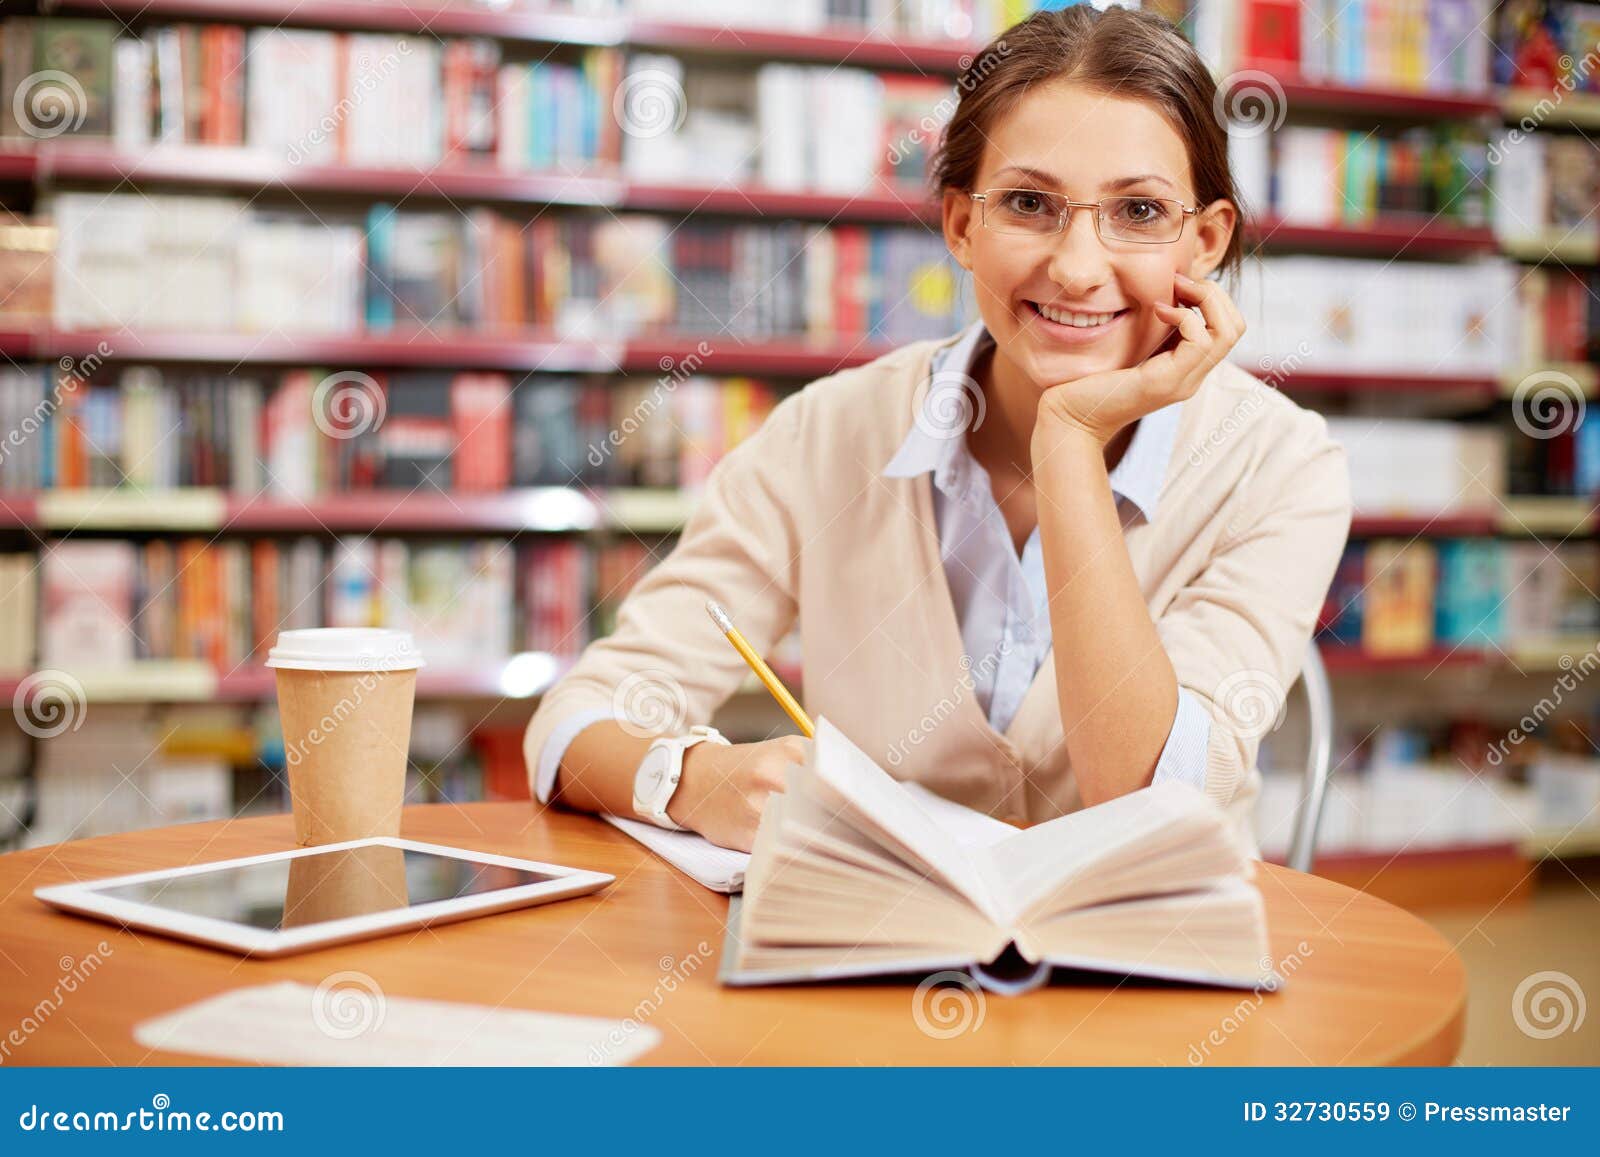 Young Girl In Library Royalty Free Stock Images - Image: 327305591300 x 957